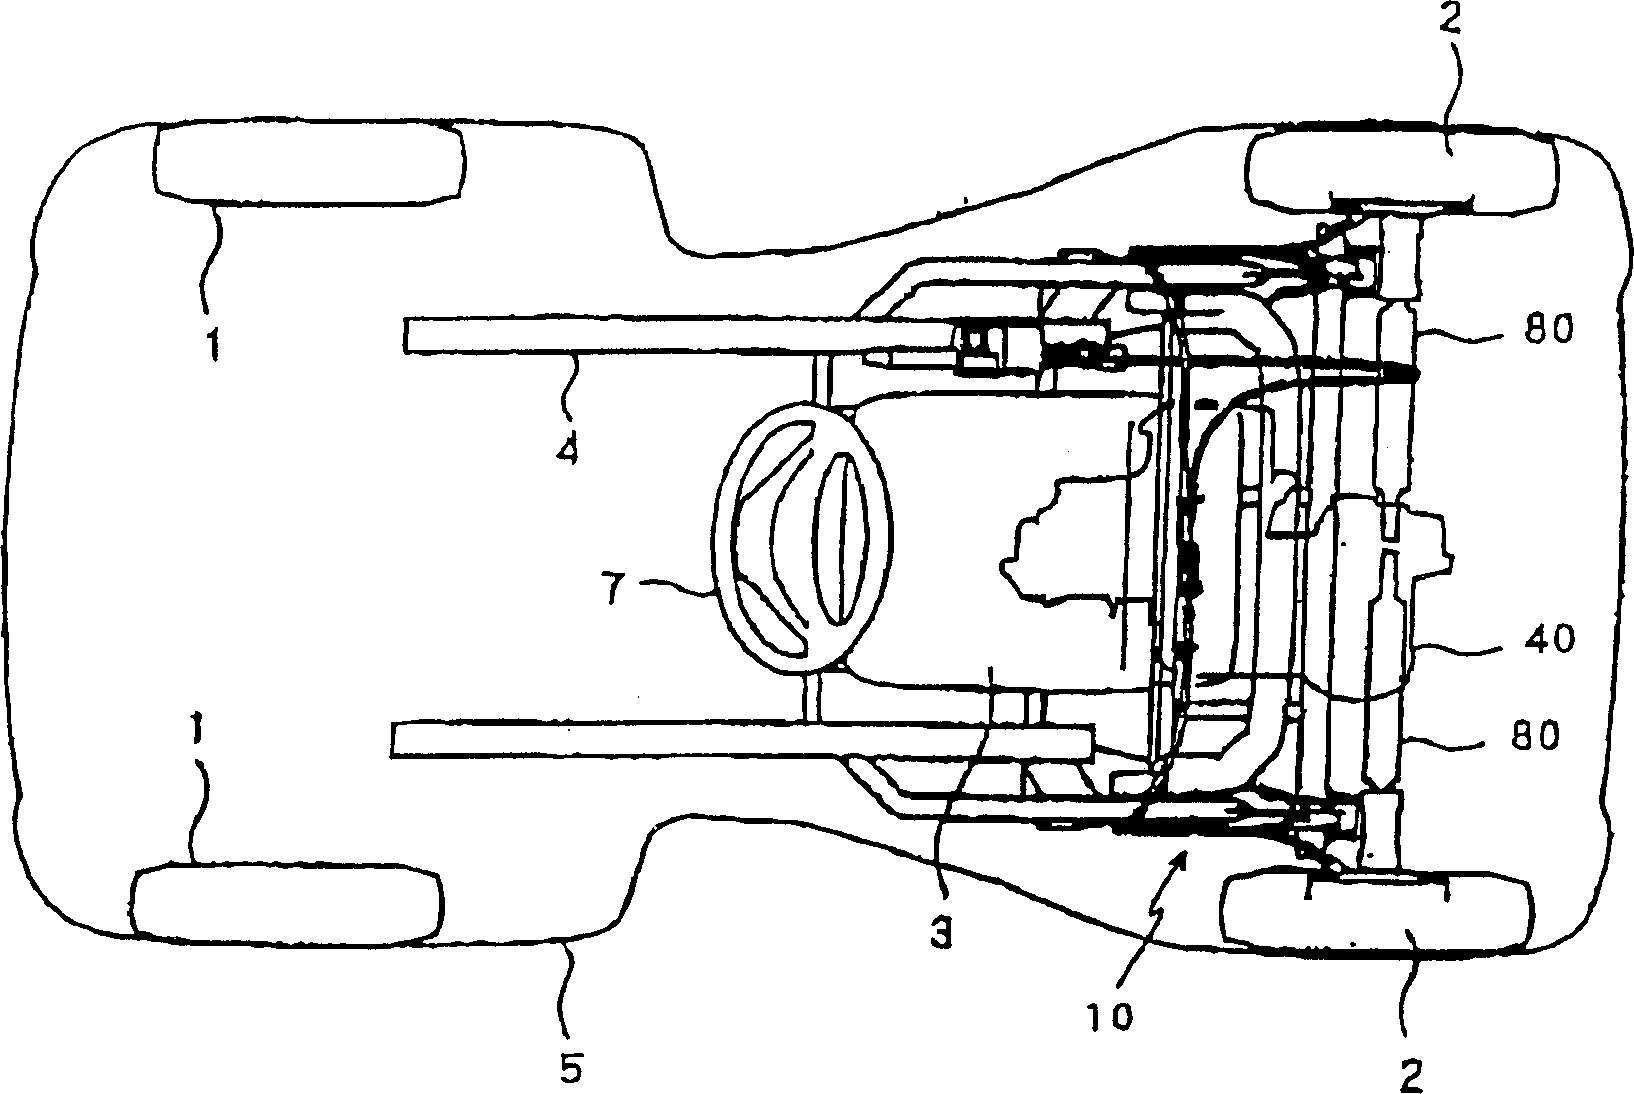 Power transmission gear of small vehicle